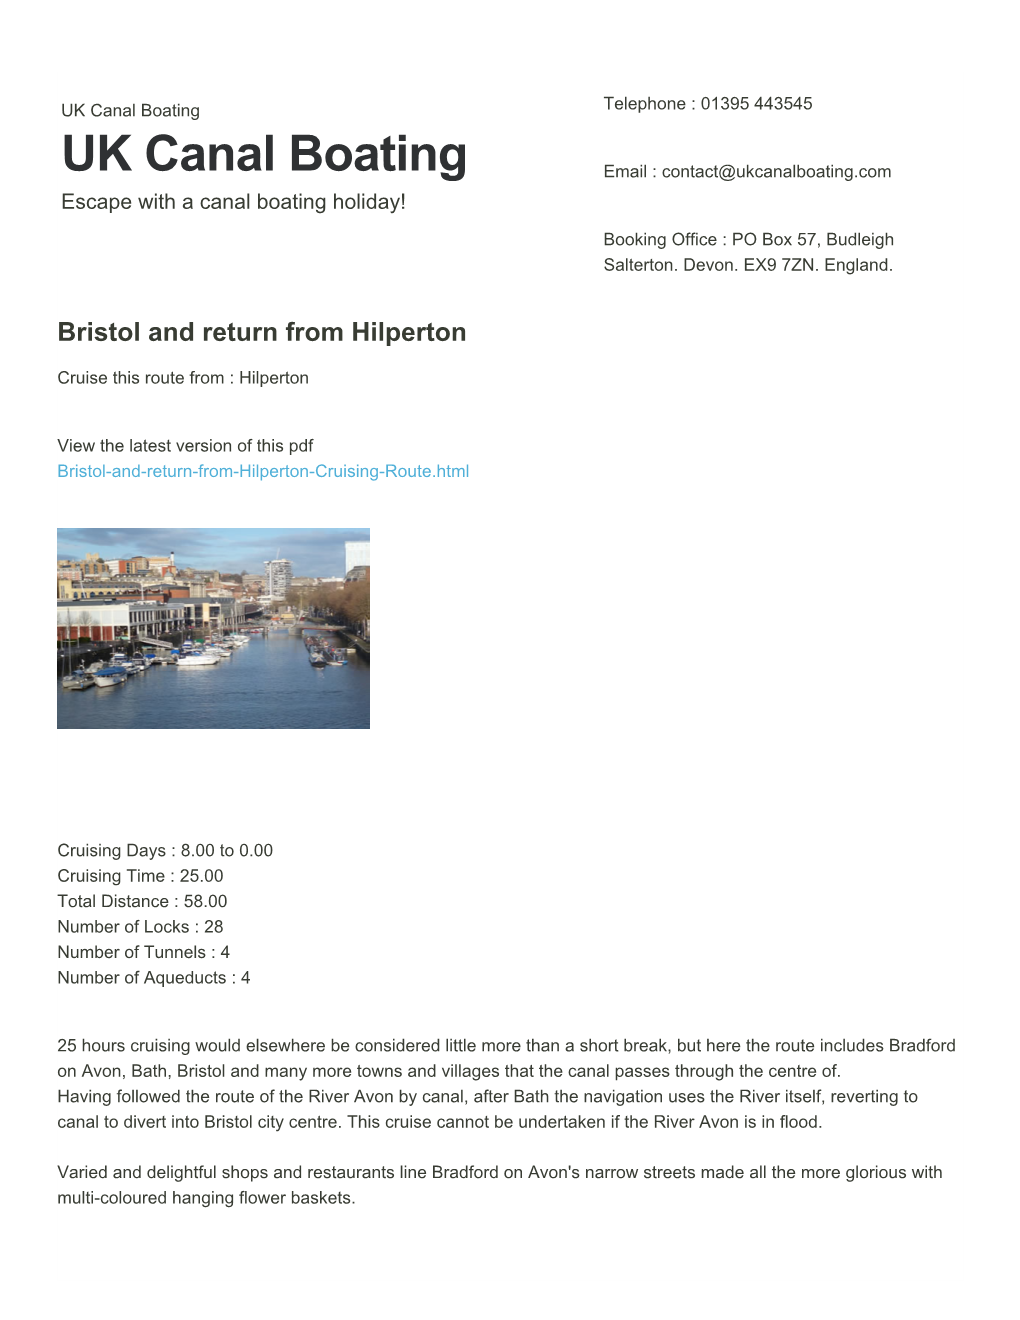 Bristol and Return from Hilperton | UK Canal Boating